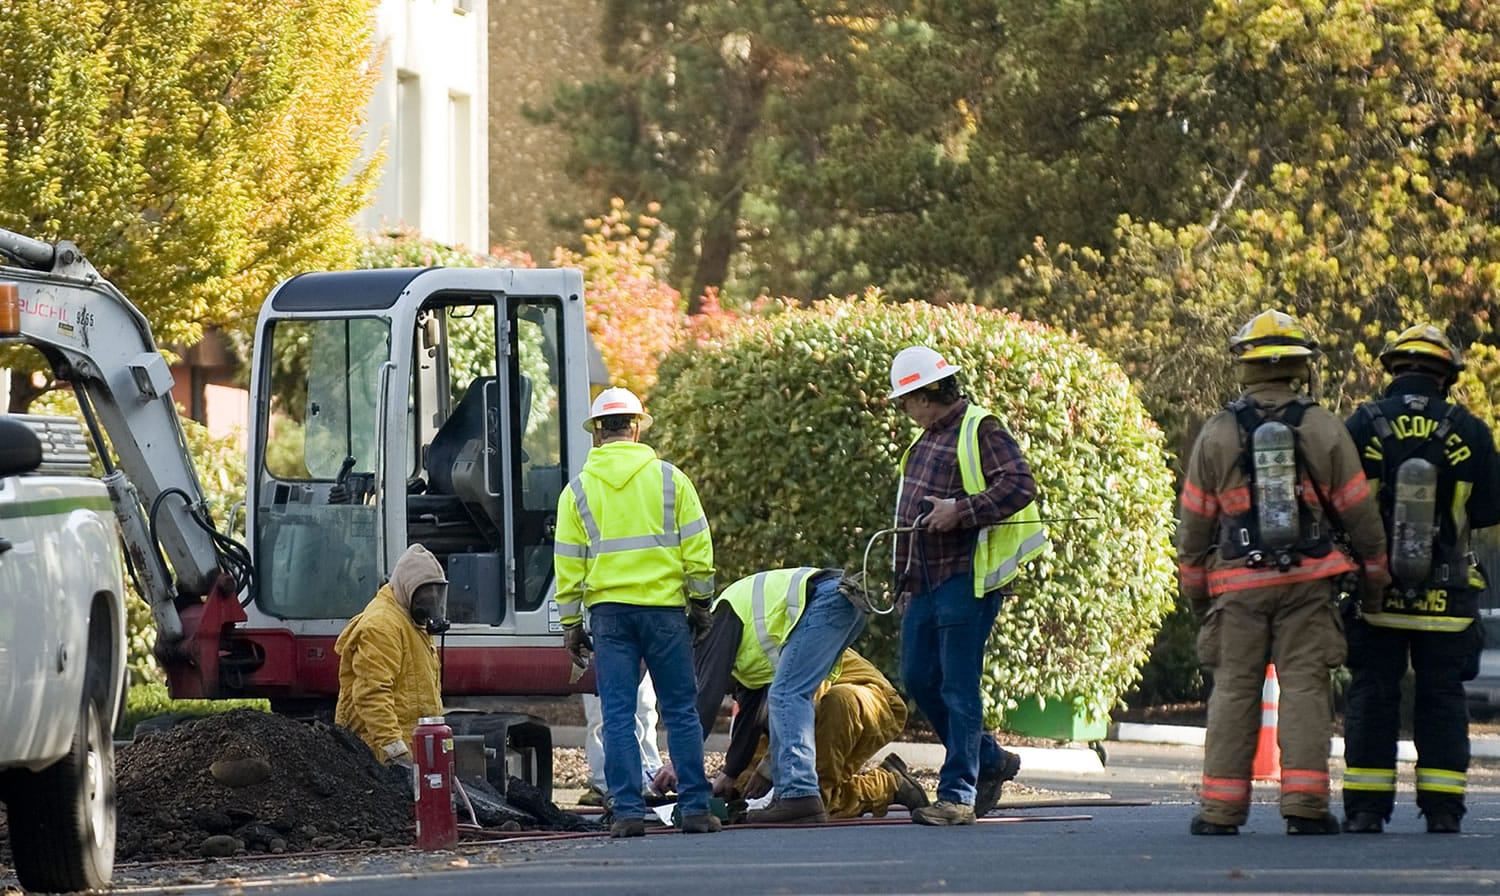 Crews work to fix a gas line leak on East 12th Street between C and D Streets on Thursday.